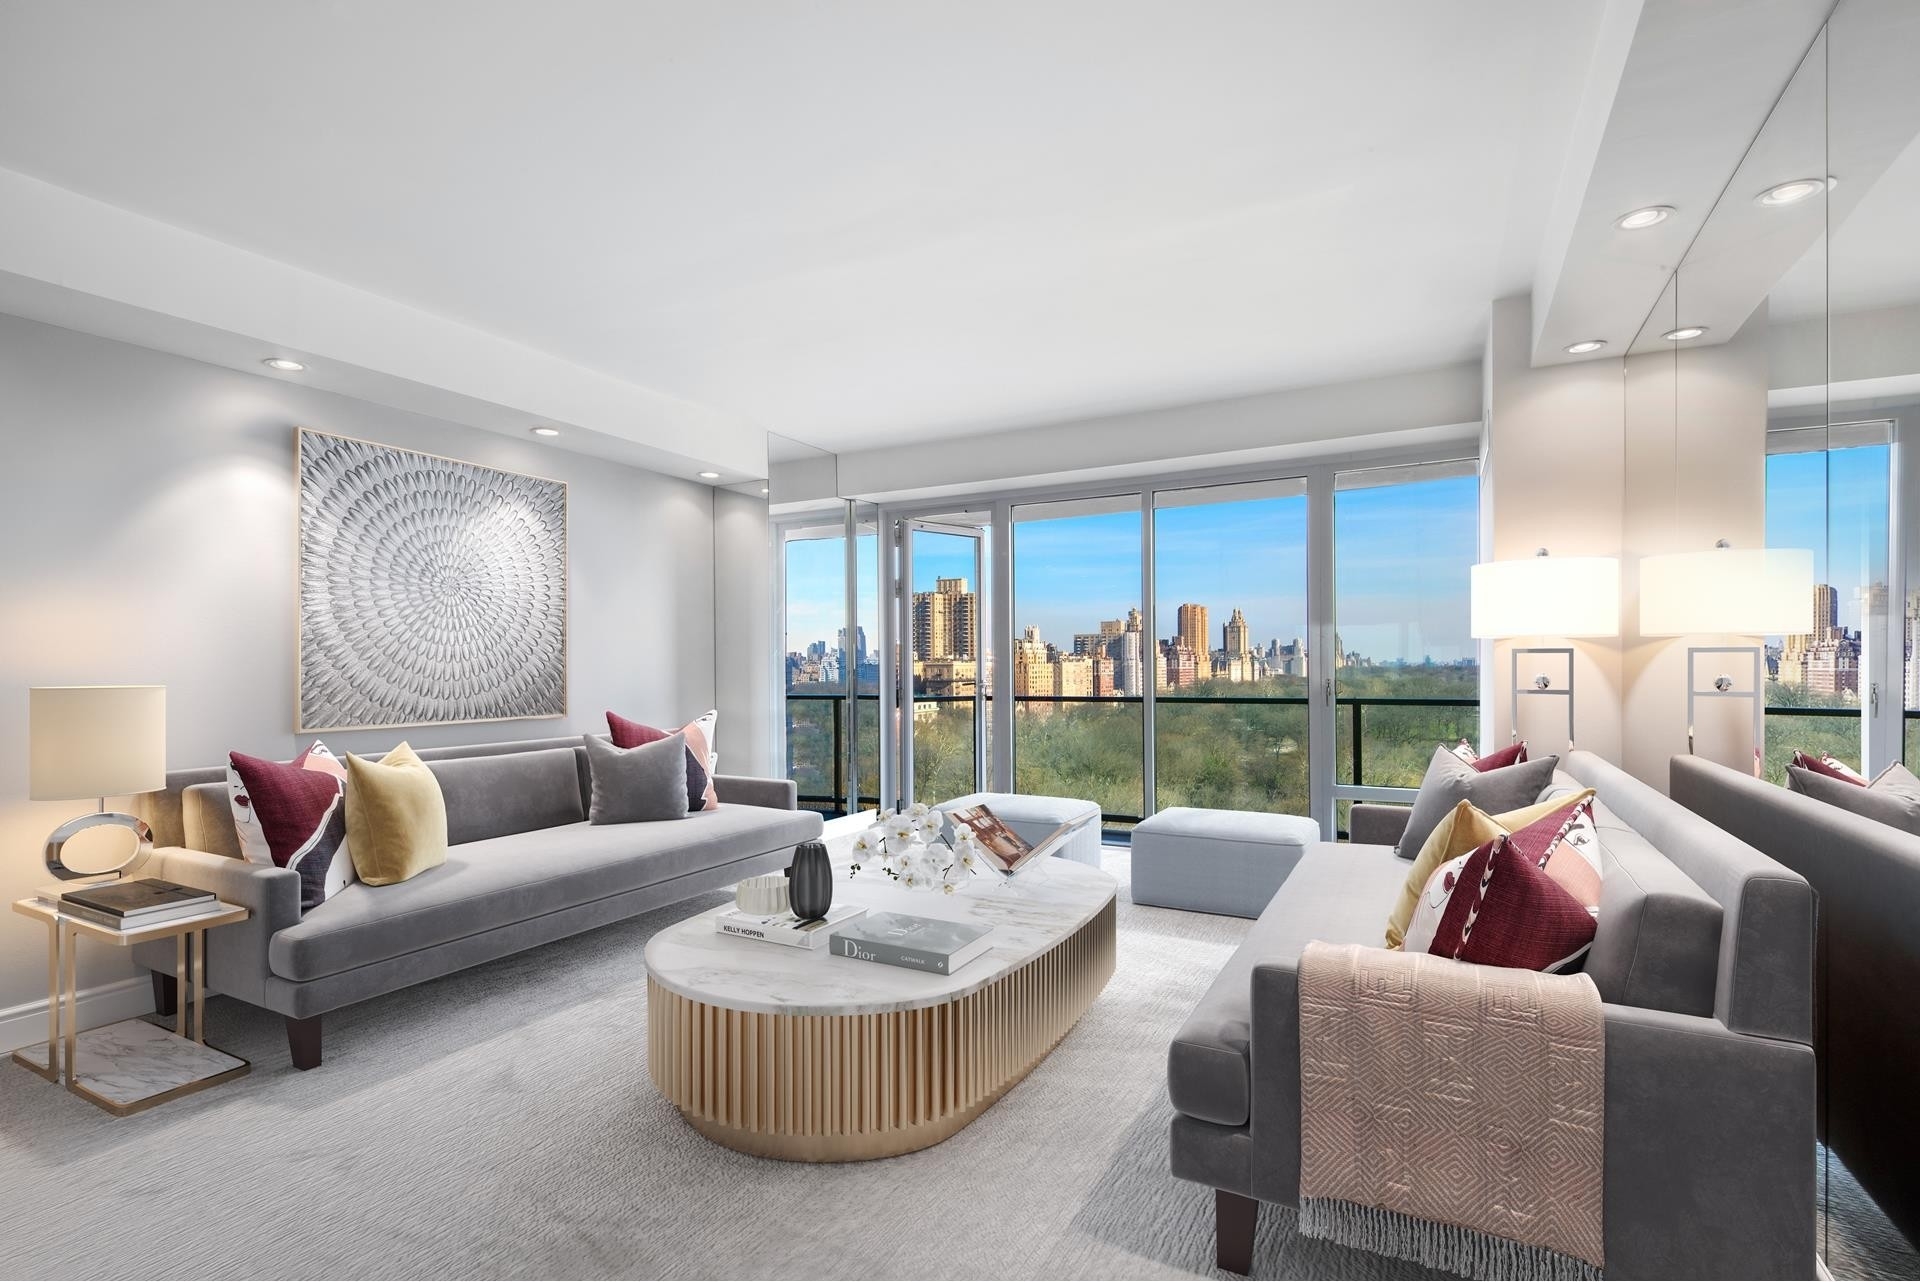 Co-op Properties for Sale at 210 CENTRAL PARK S, 17D Central Park South, New York, NY 10019